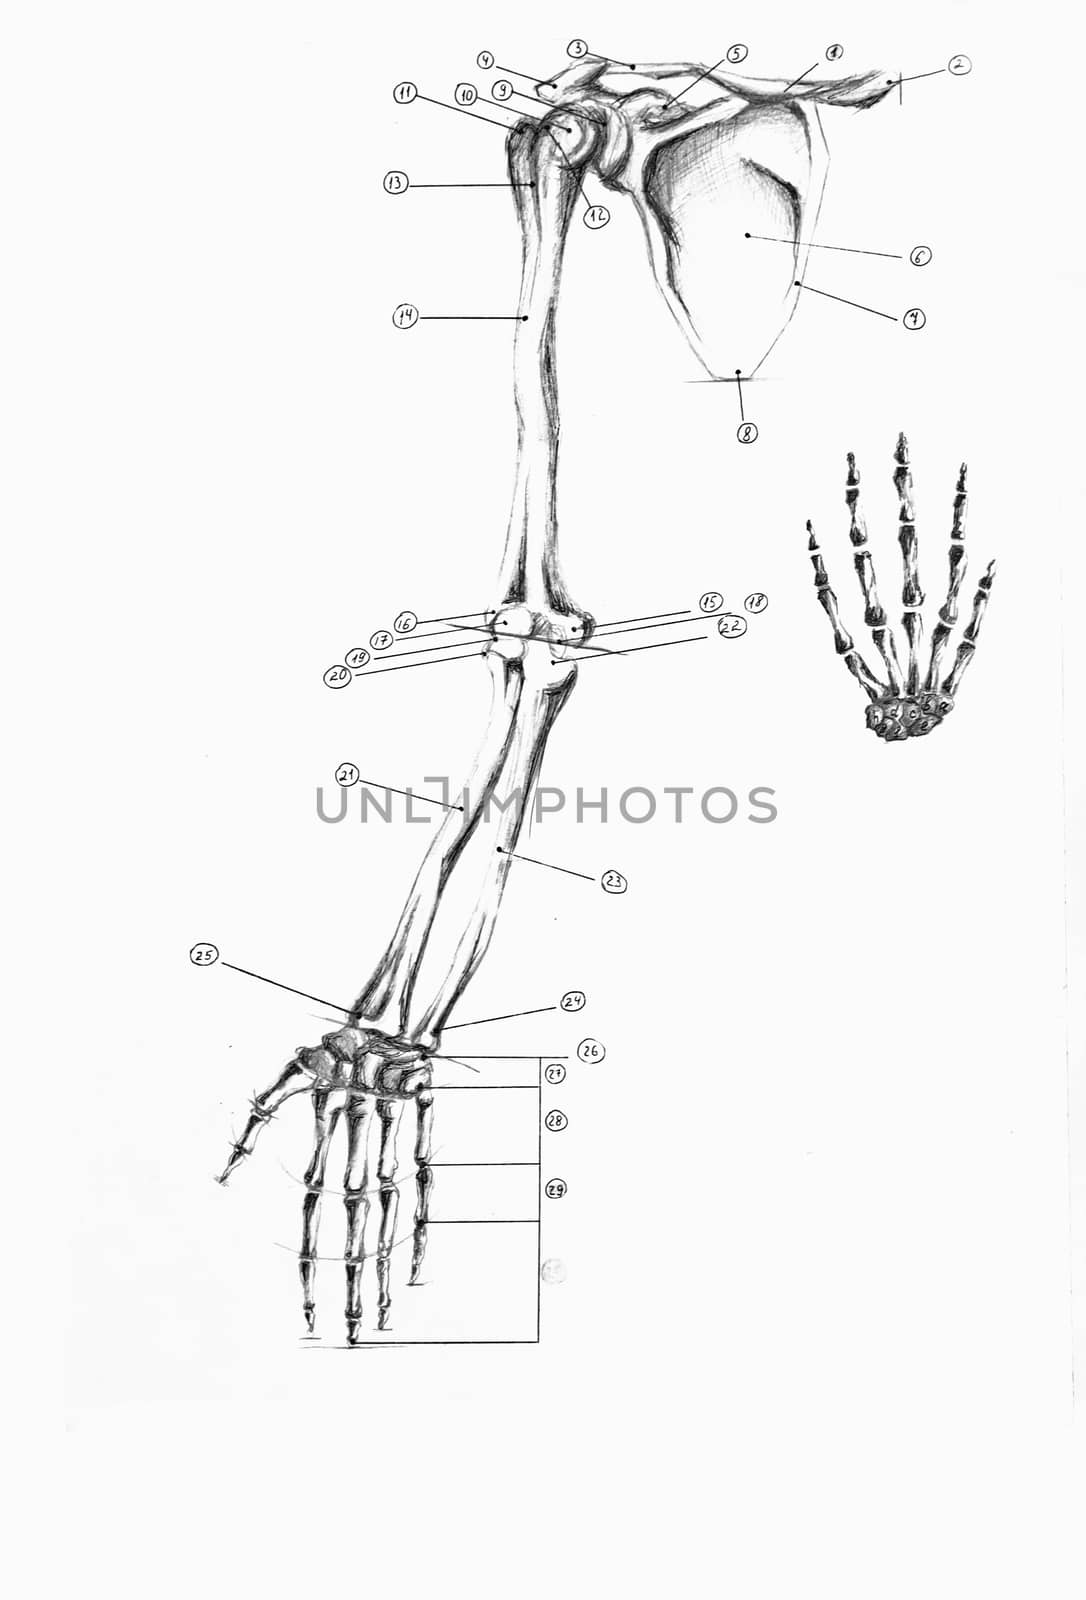 Anatomical skeleton collarbone, hands and fingers isolated